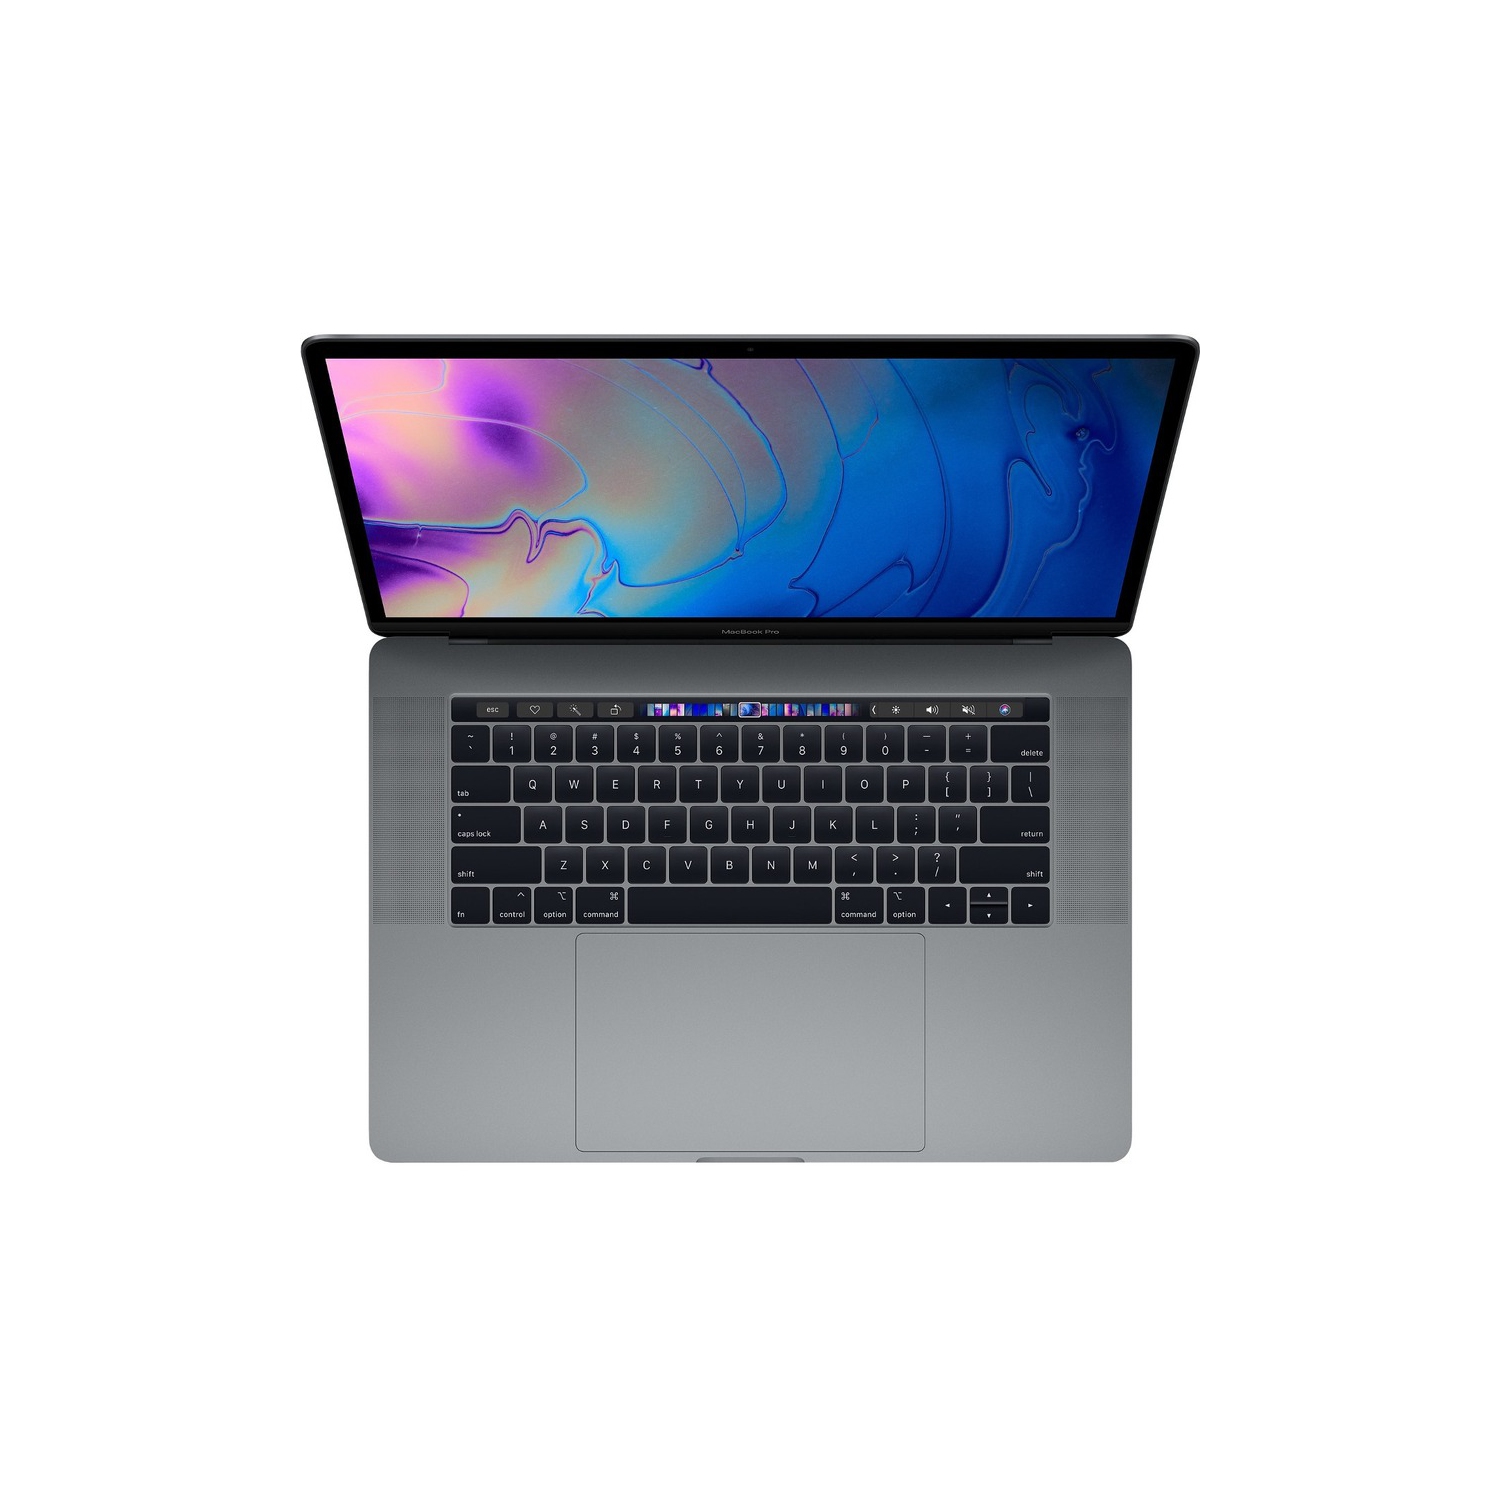 Refurbished (Good) - Apple MacBook Pro with Touch Bar 15.4" - Space Grey (Intel Core i7 2.6GHz/512GB/16GB RAM) - (2018 Model) English